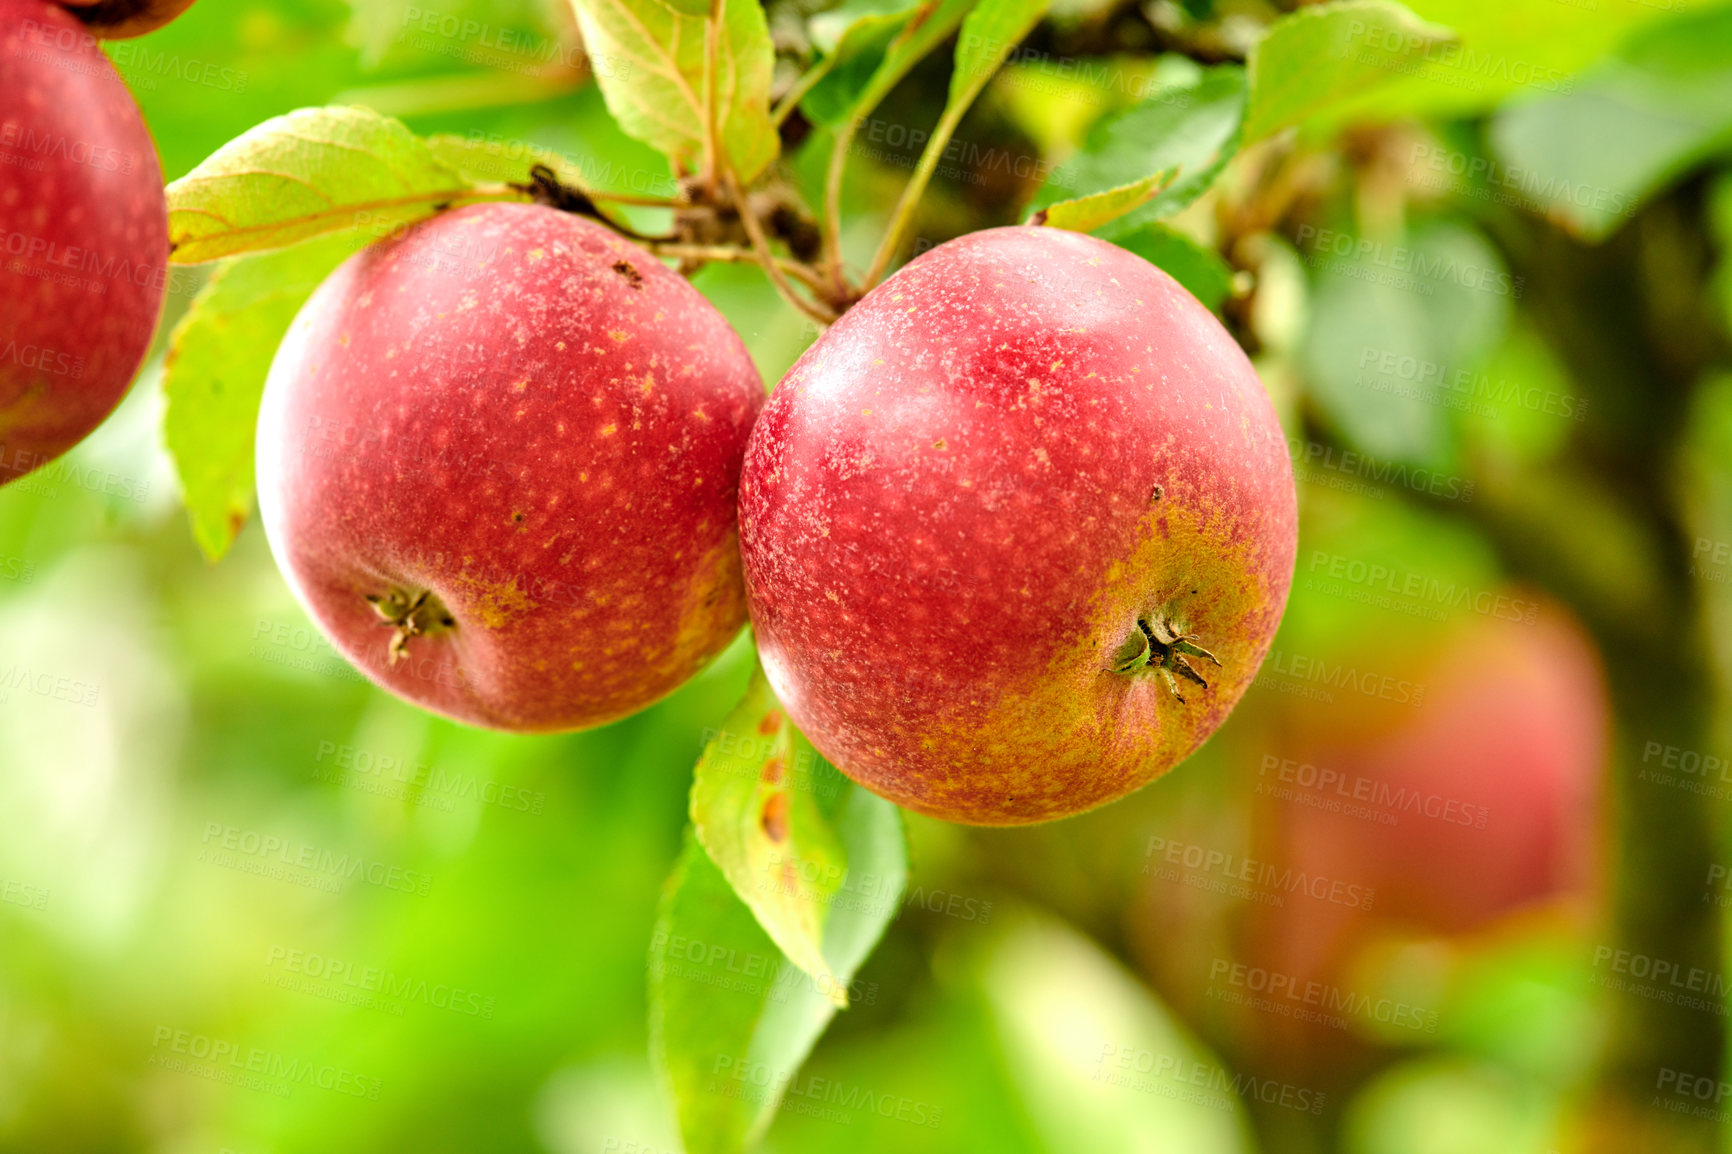 Buy stock photo Nature, organic and apples on a tree in a garden or sustainable, agriculture or agro environment. Health and eco friendly and succulent red fruit or fresh, raw and sweet produce on a plant in a field